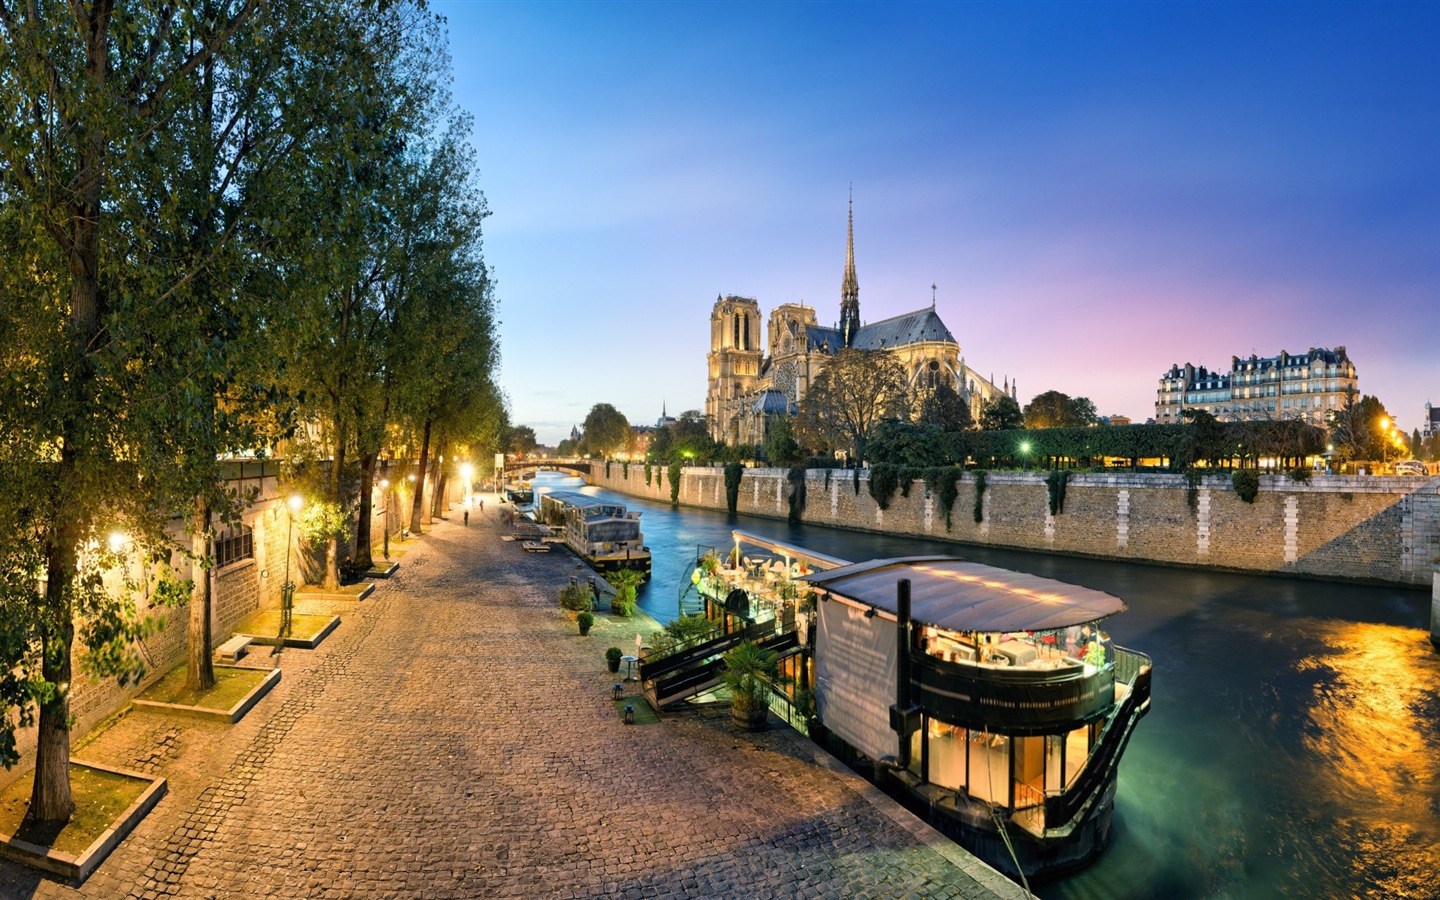 Notre Dame HD Wallpapers #3 - 1440x900